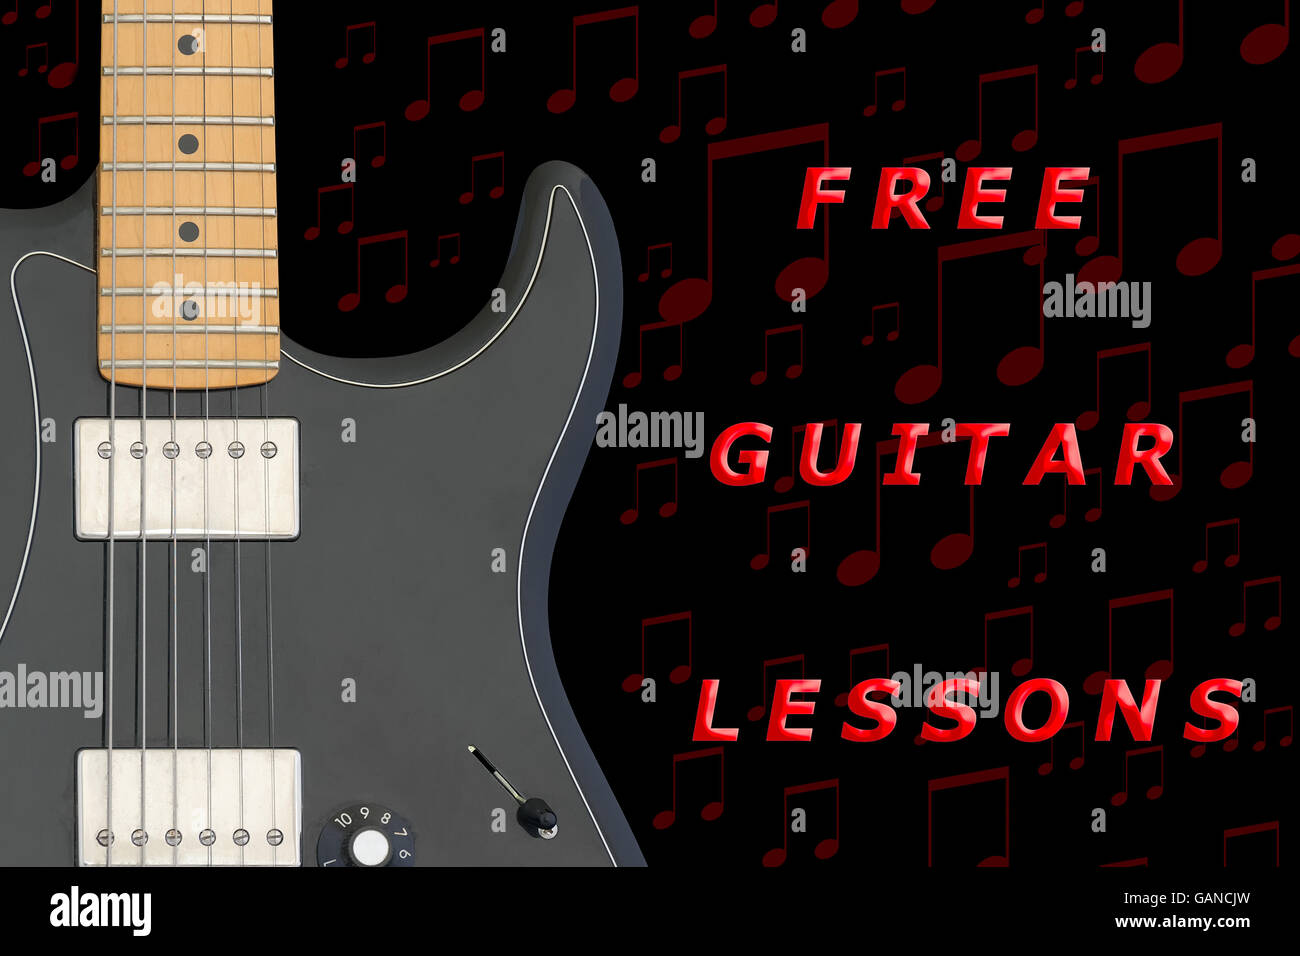 Free electric guitar lessons on black background Stock Photo ...